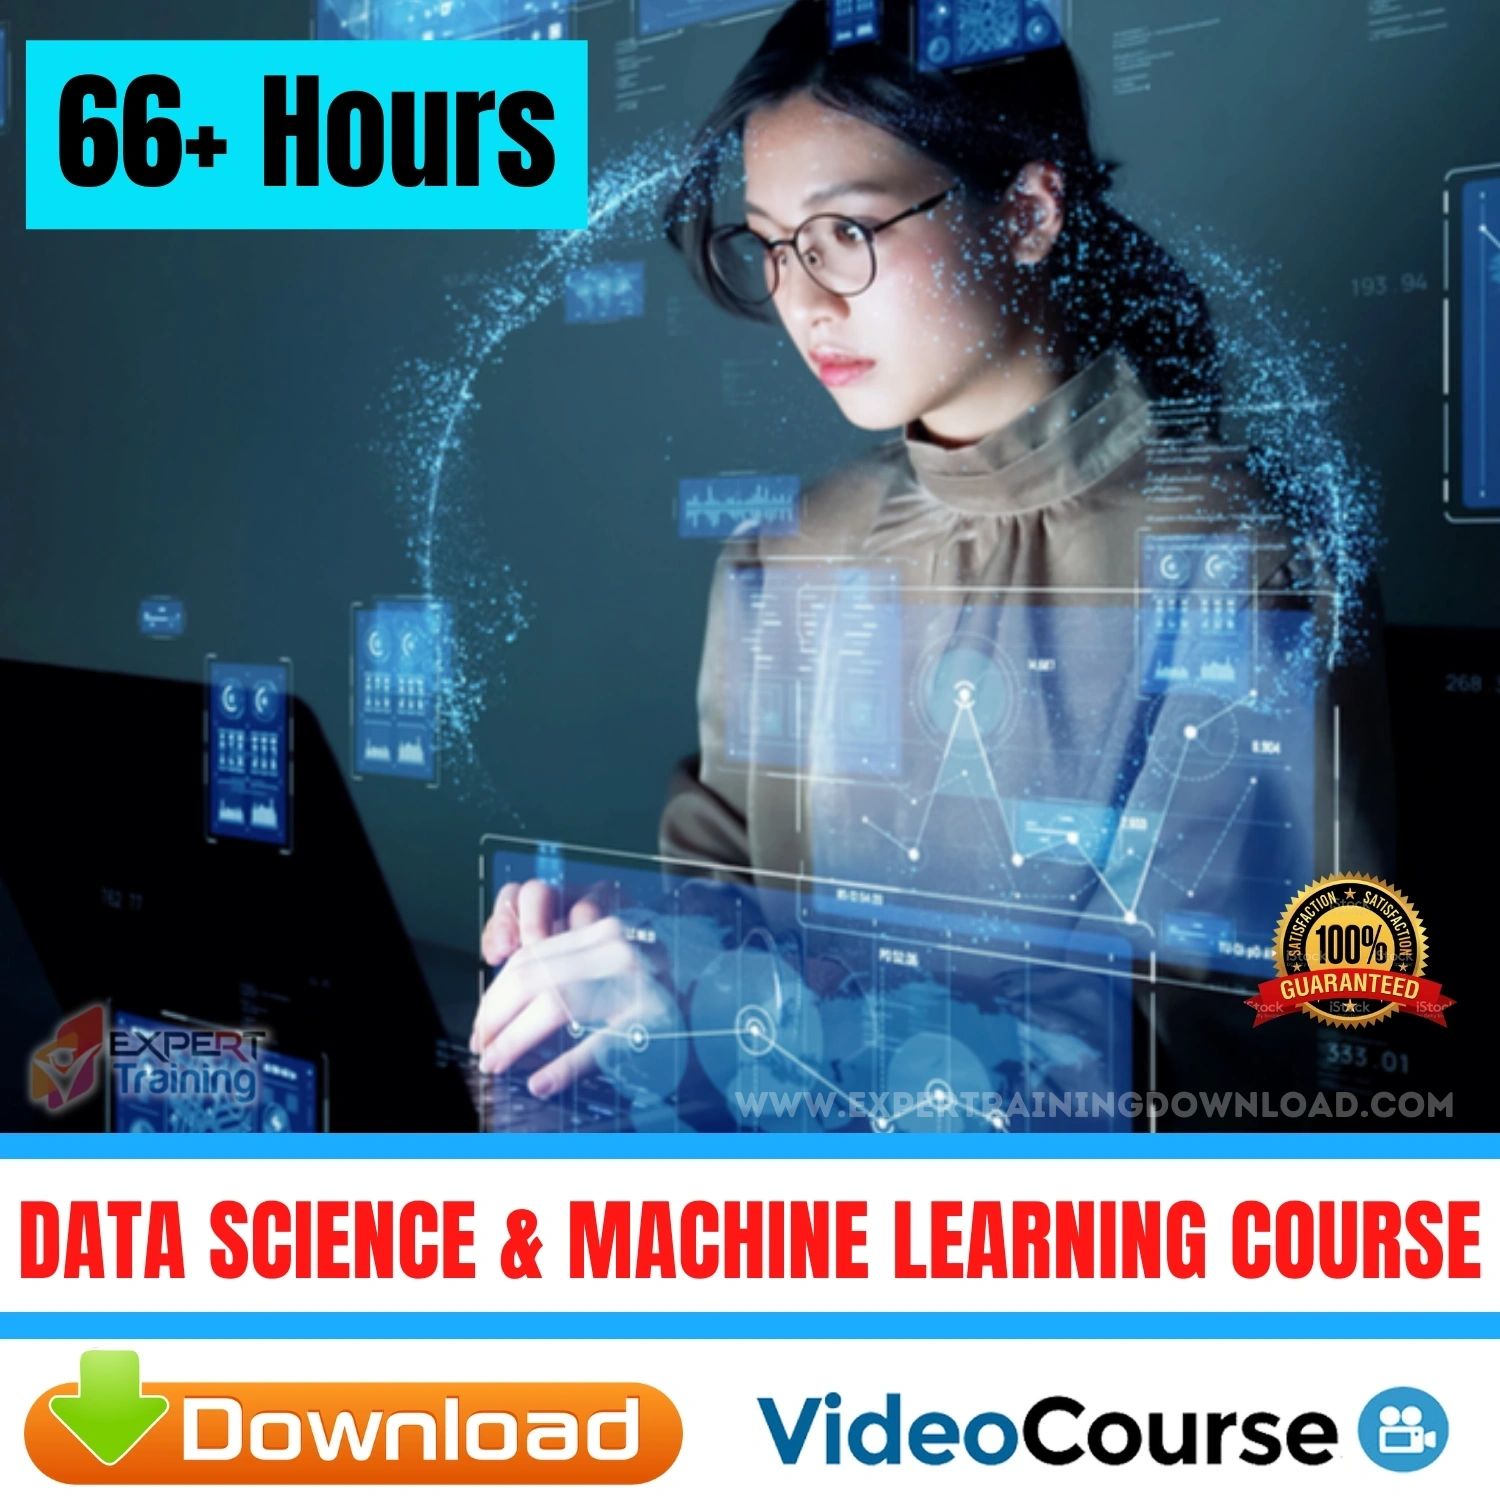 Data Science & Machine Learning Course